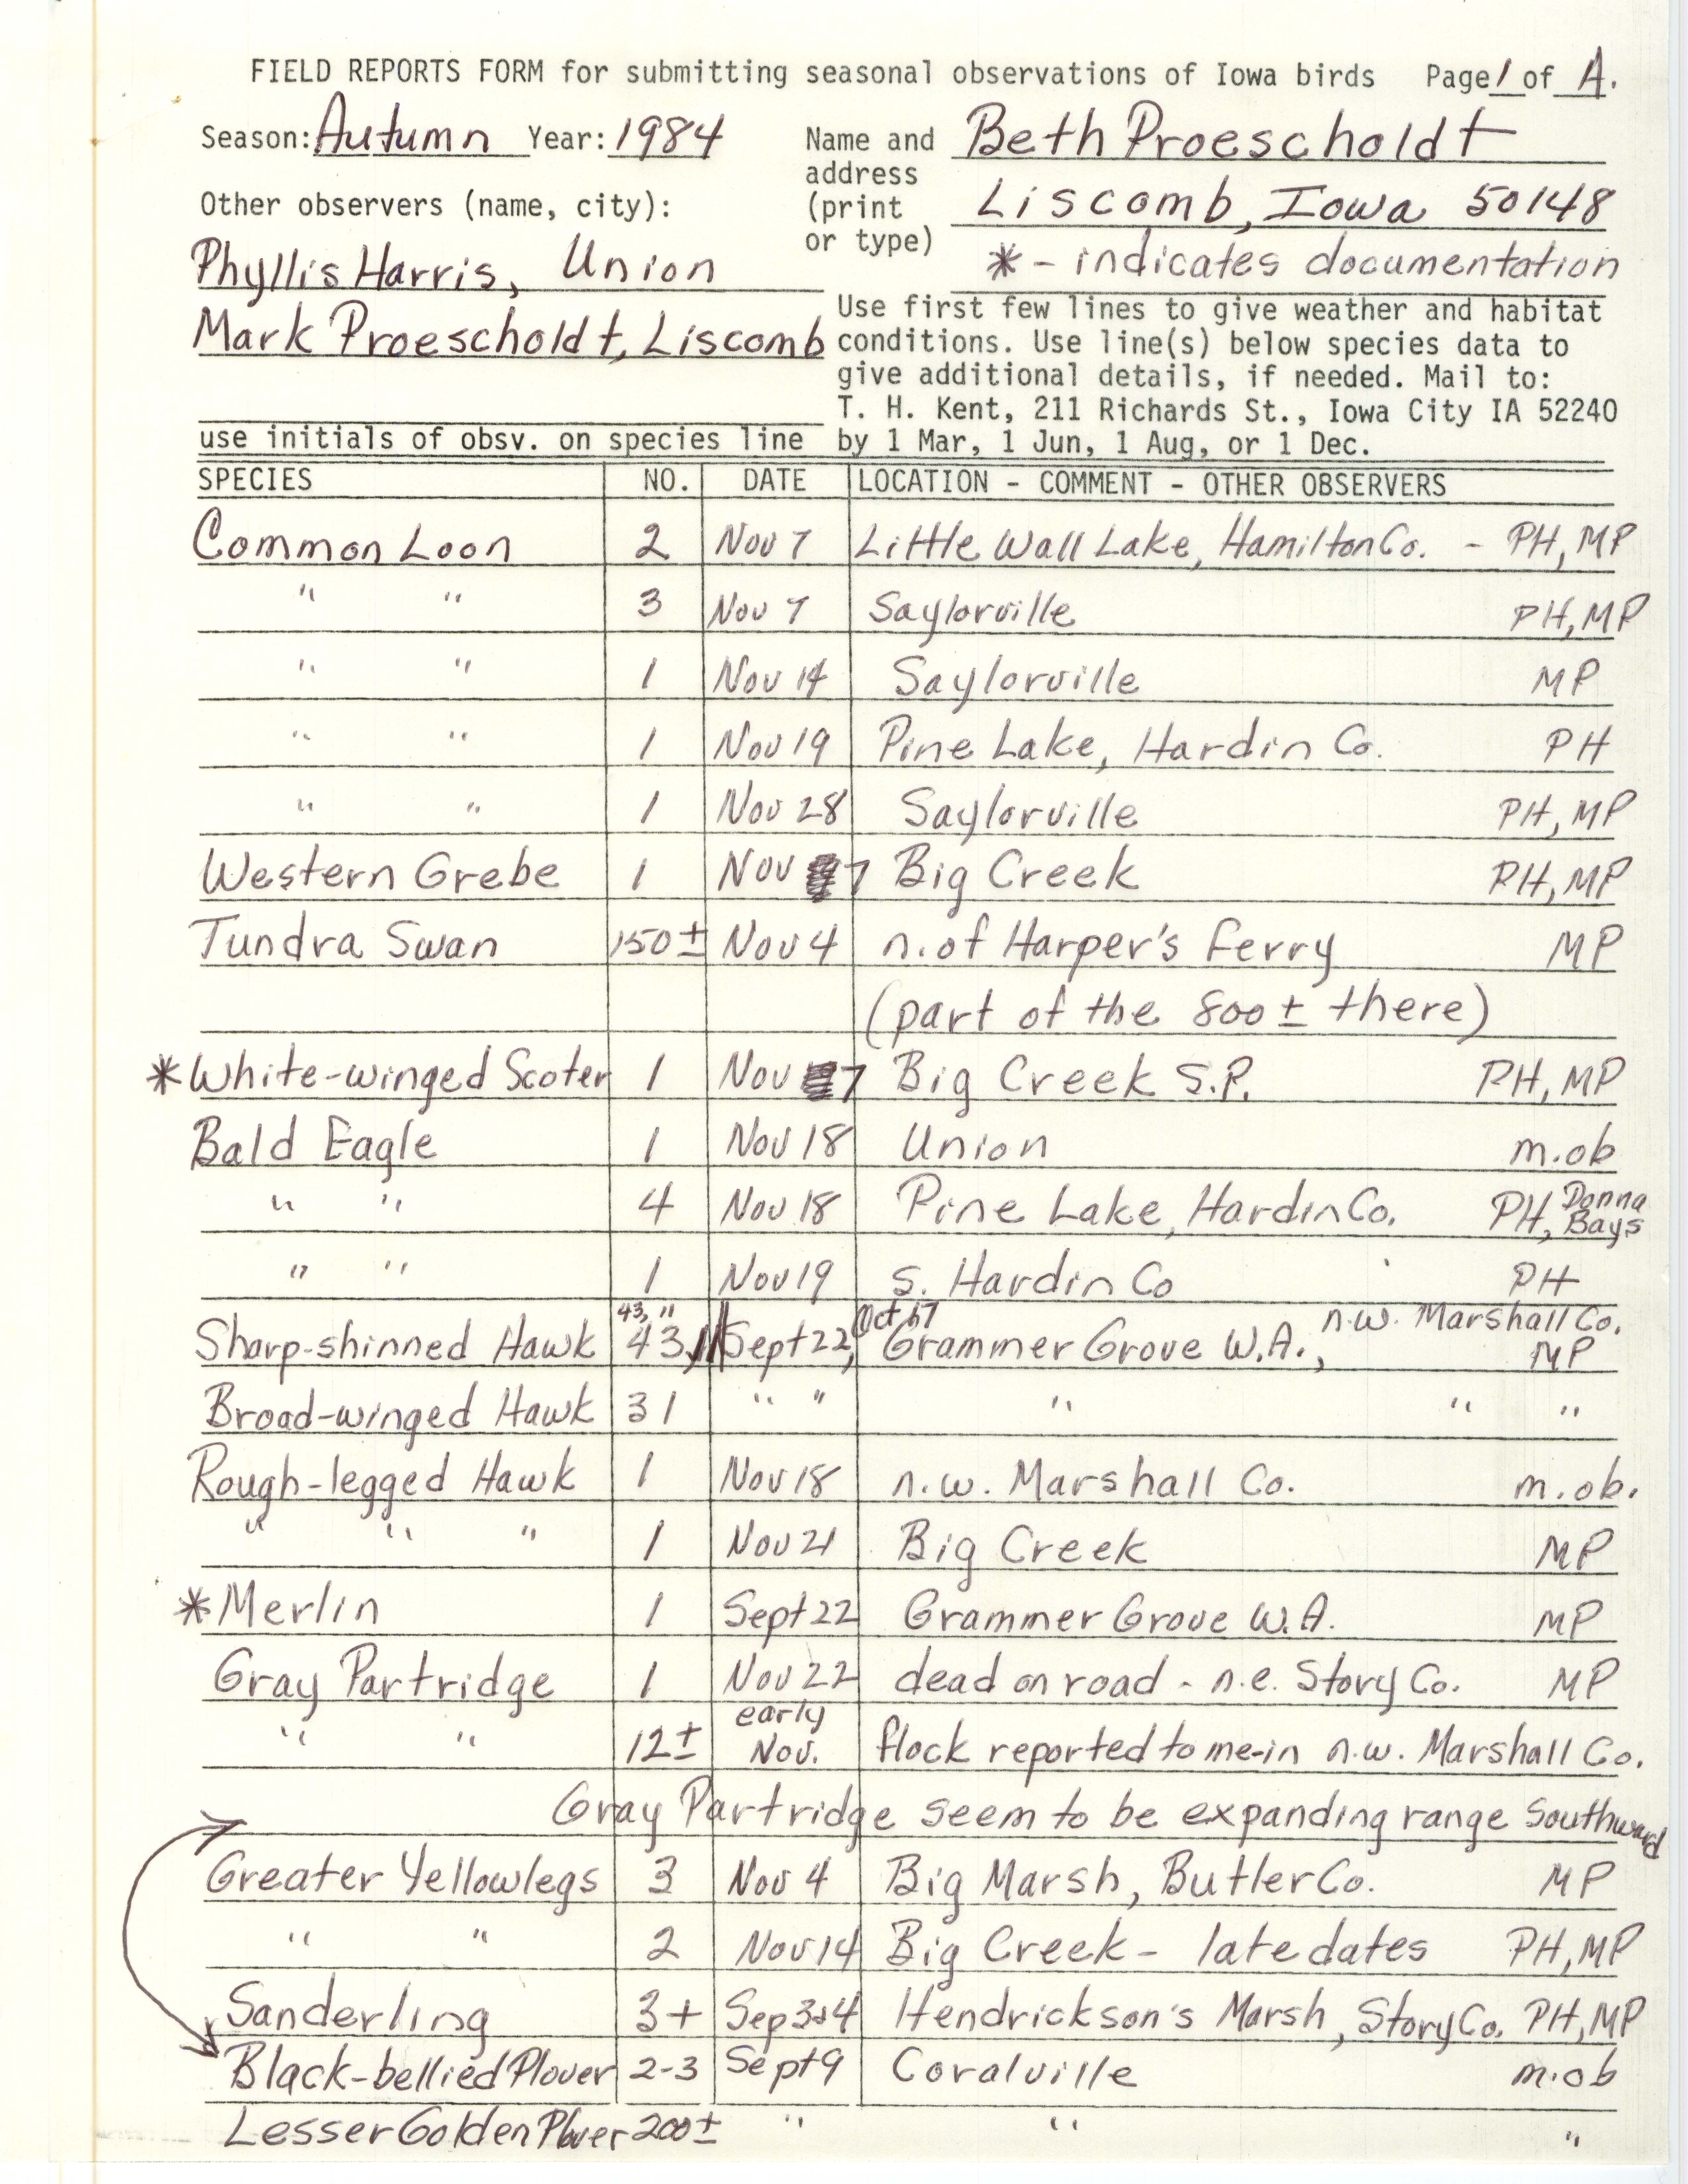 Field notes contributed by Beth and Mark Proescholdt, Liscomb, Iowa, fall 1984